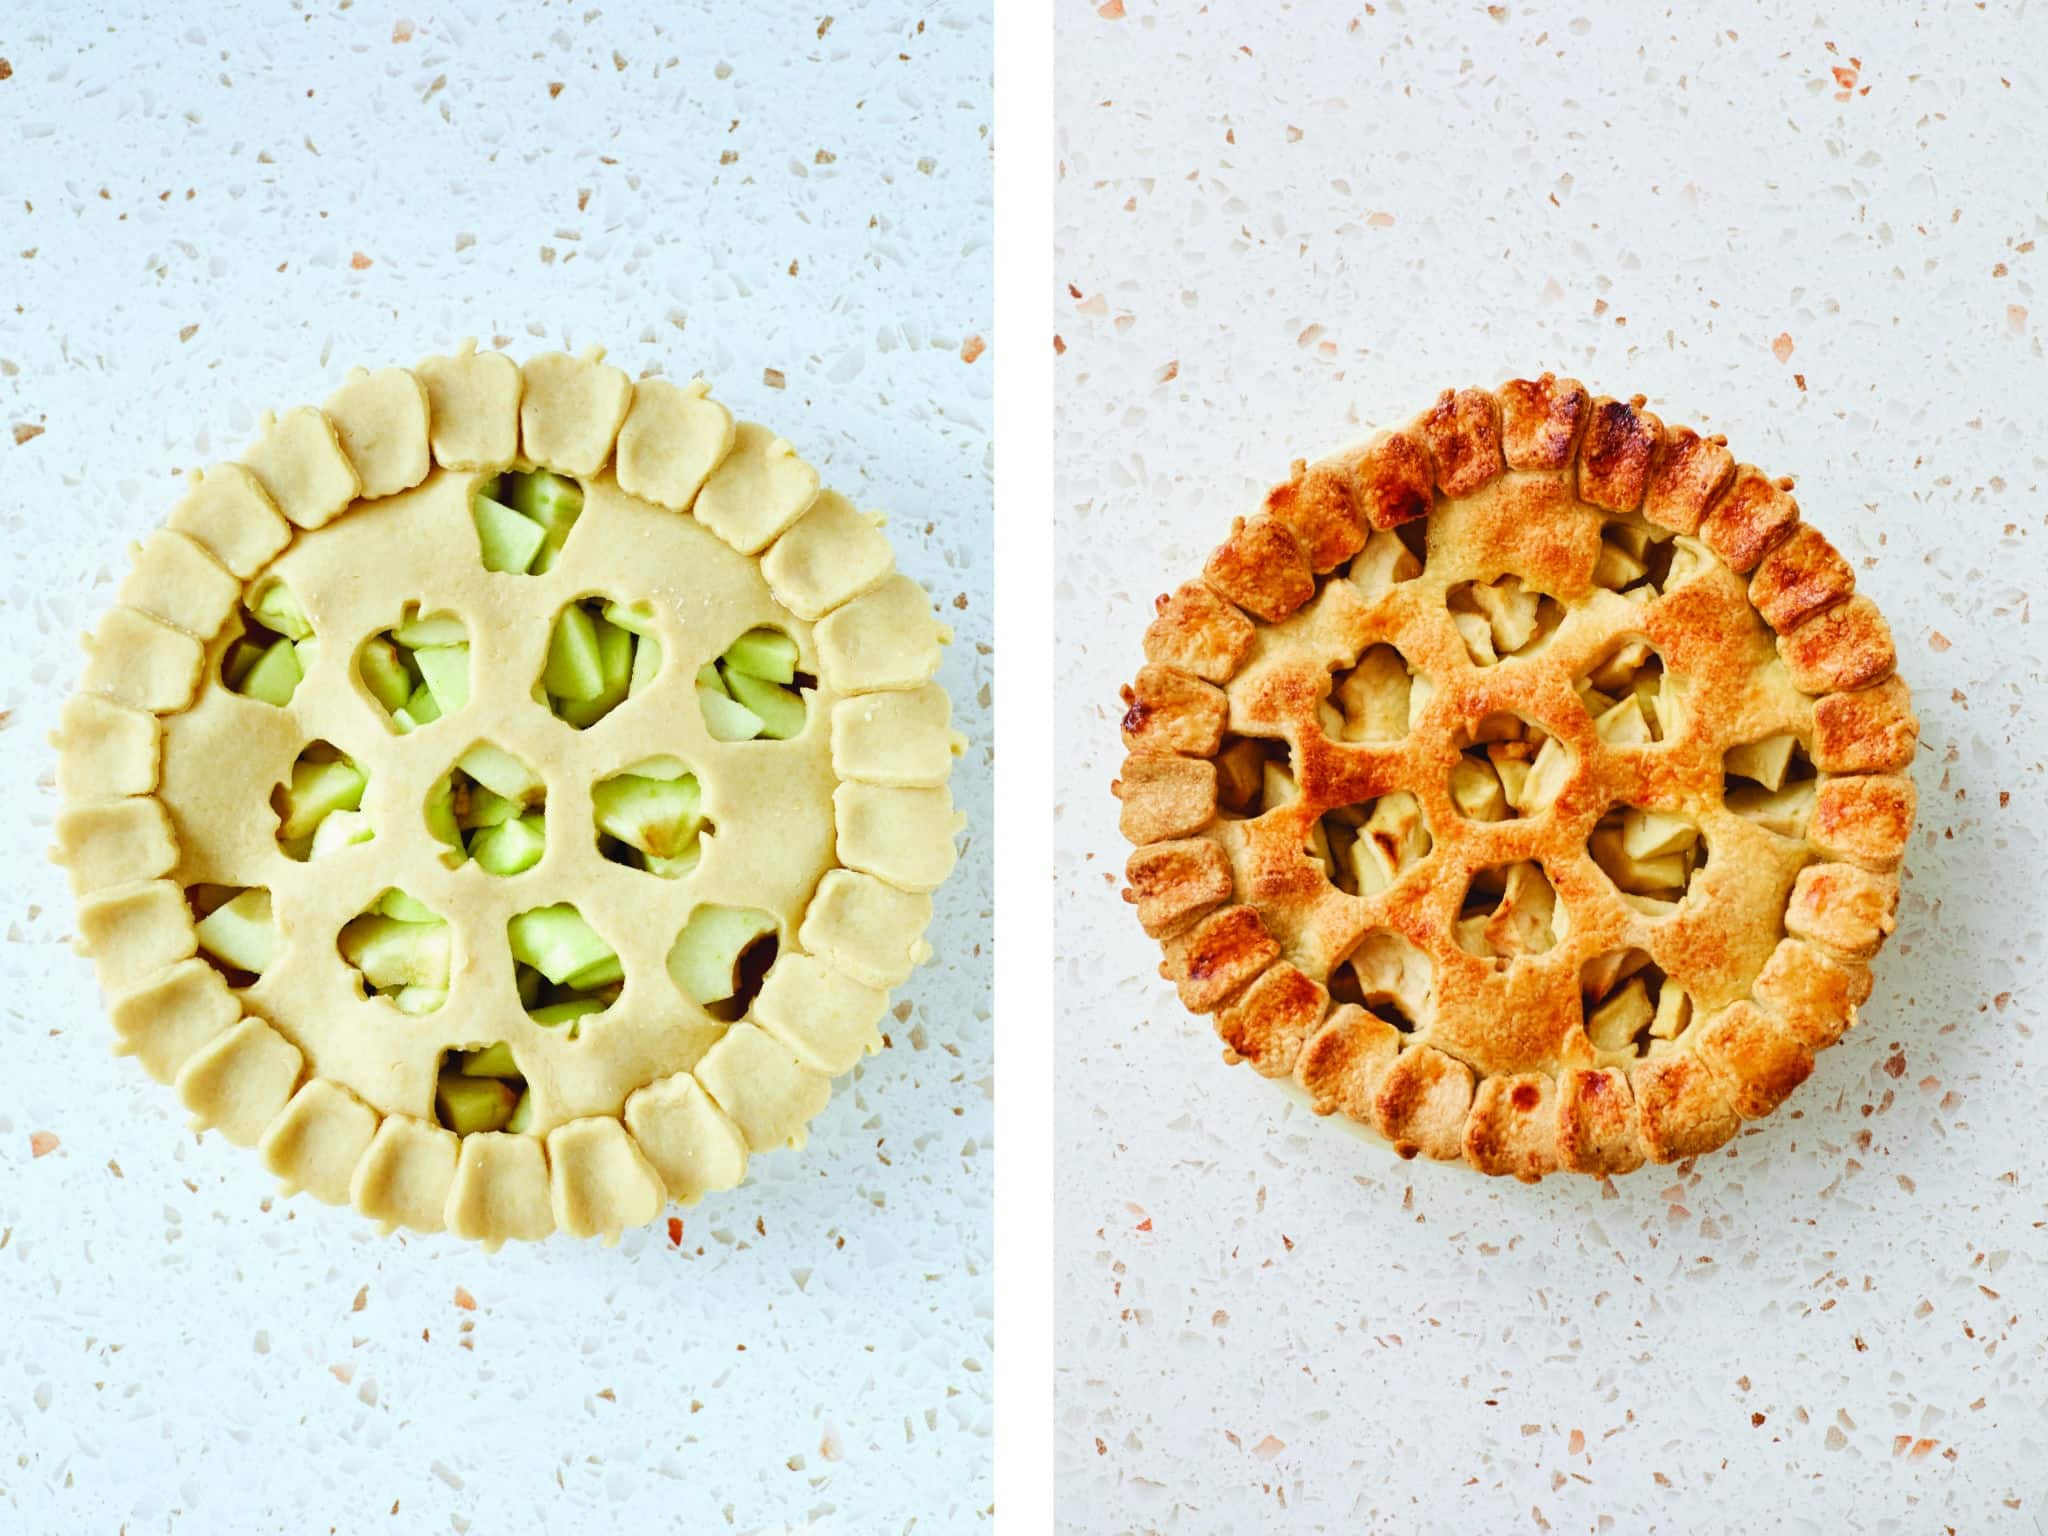 An unbaked and baked pie featuring cutouts.